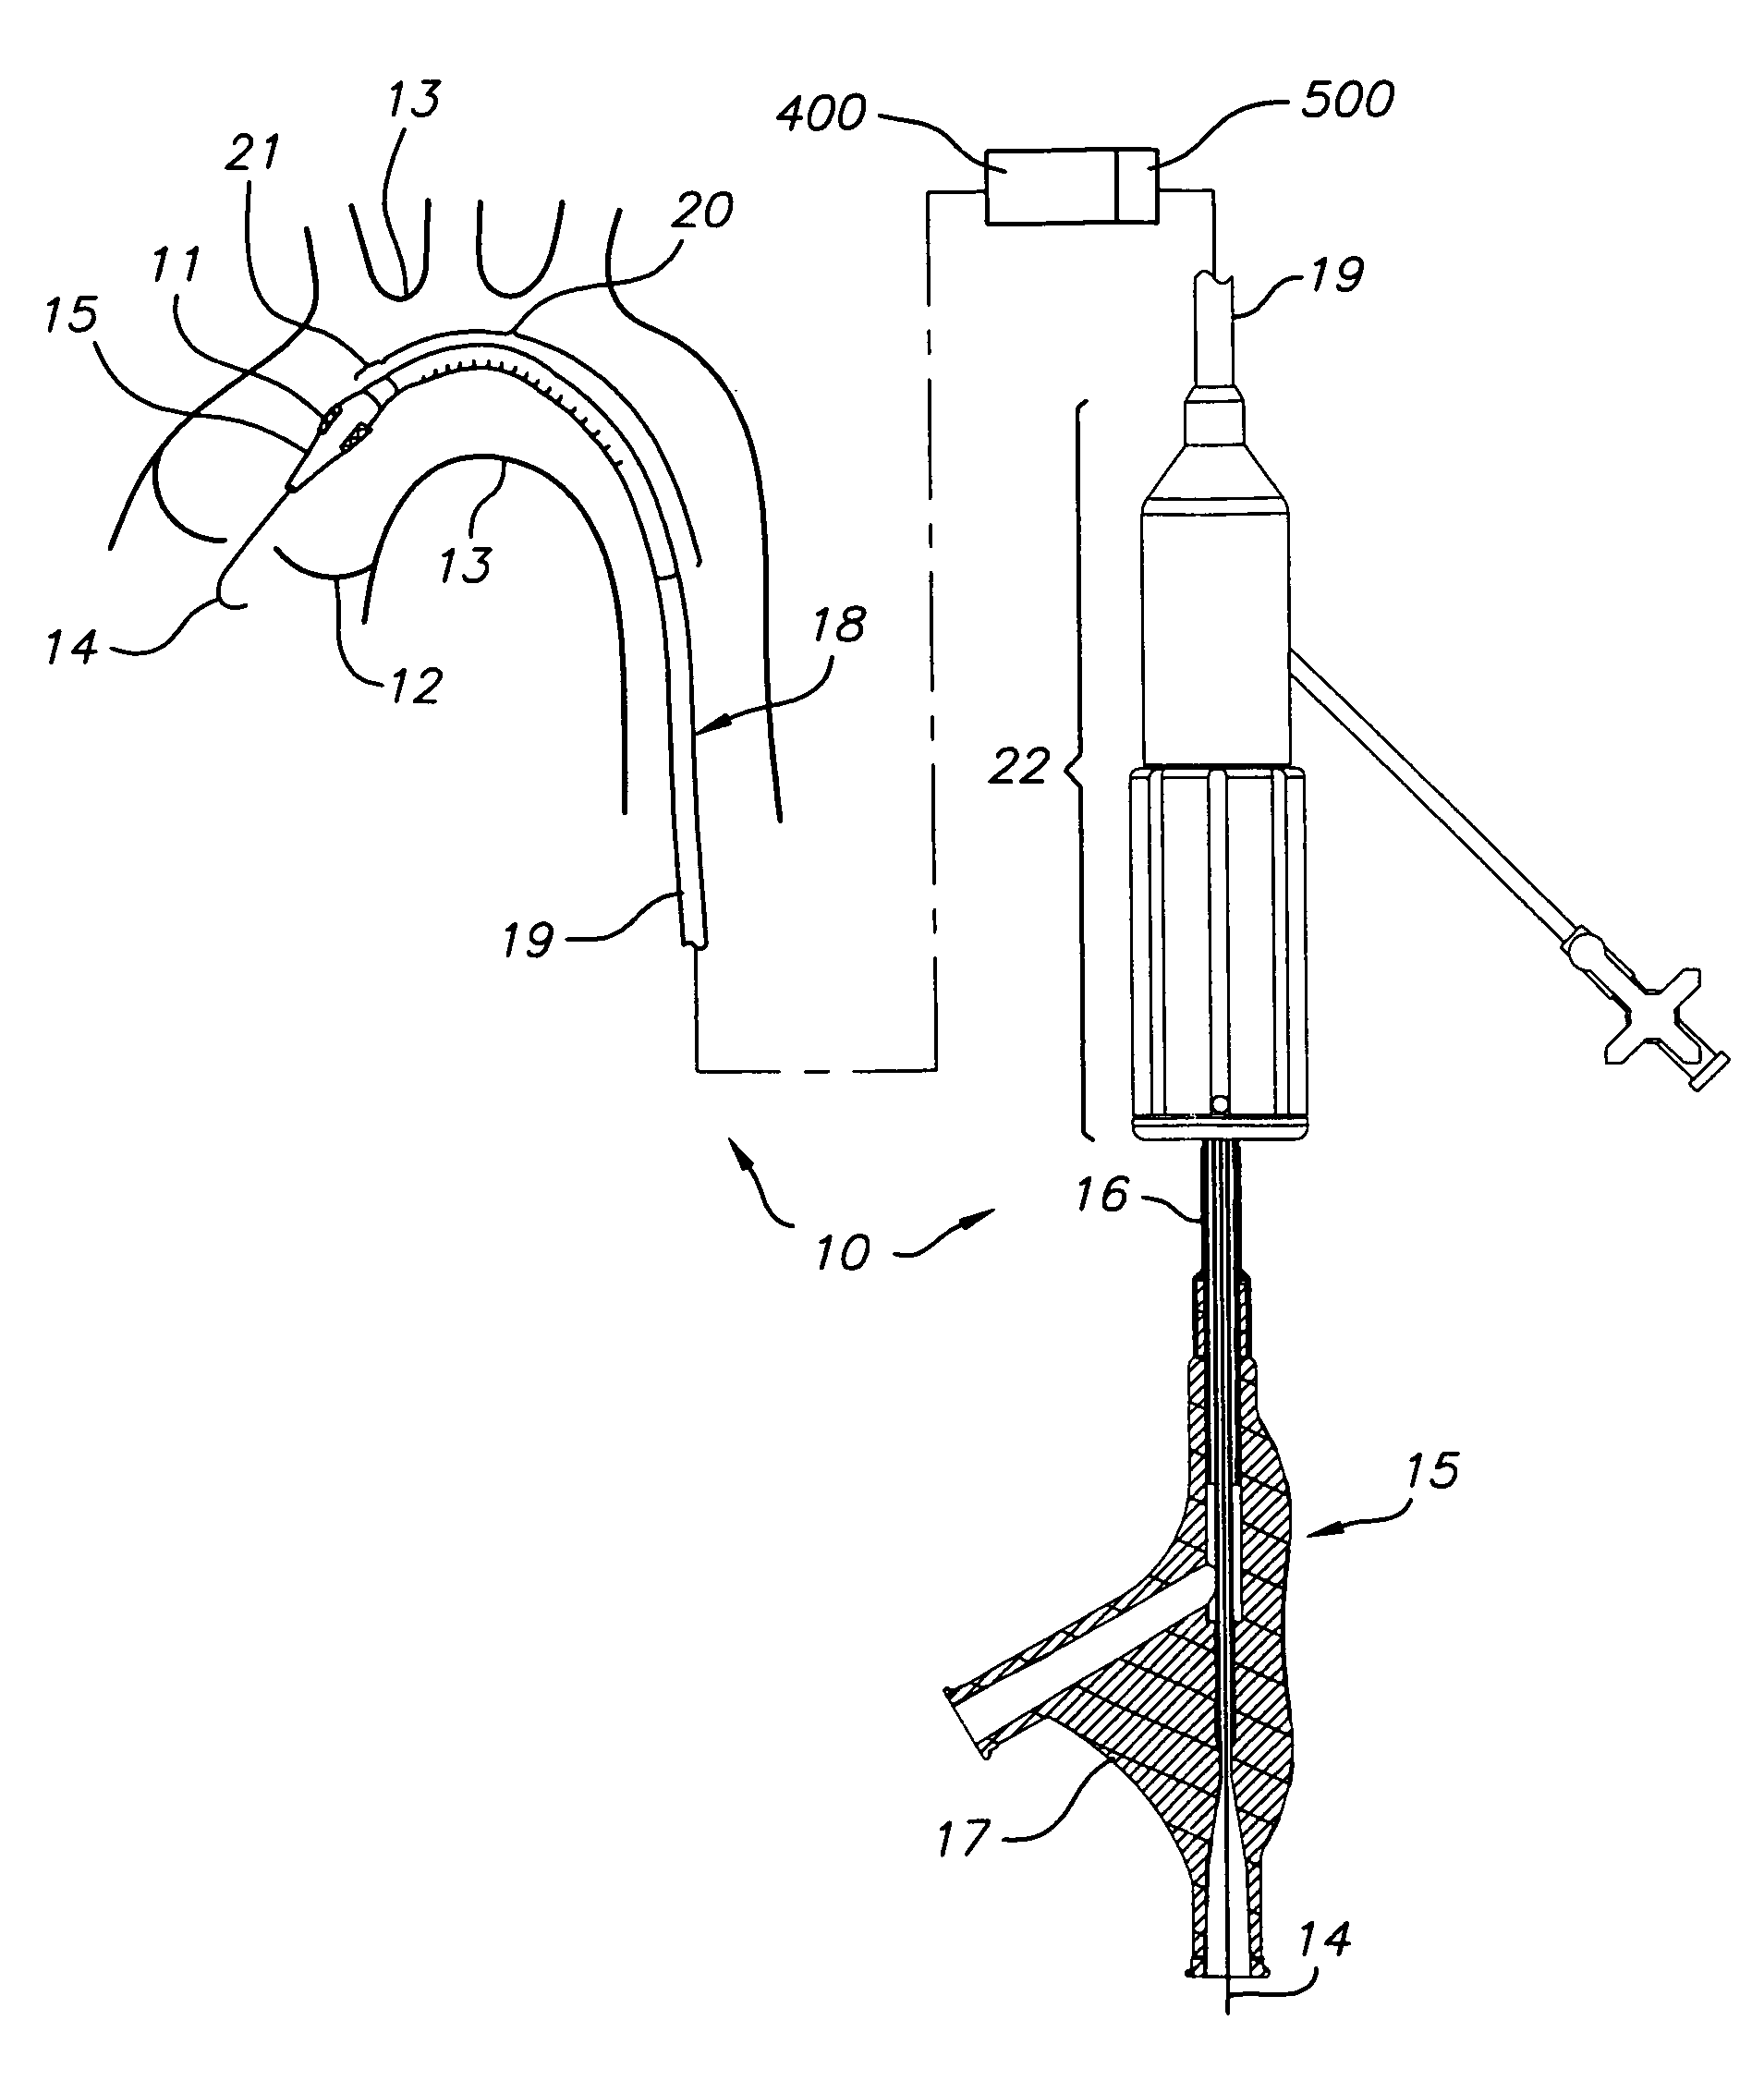 Heart valve delivery system